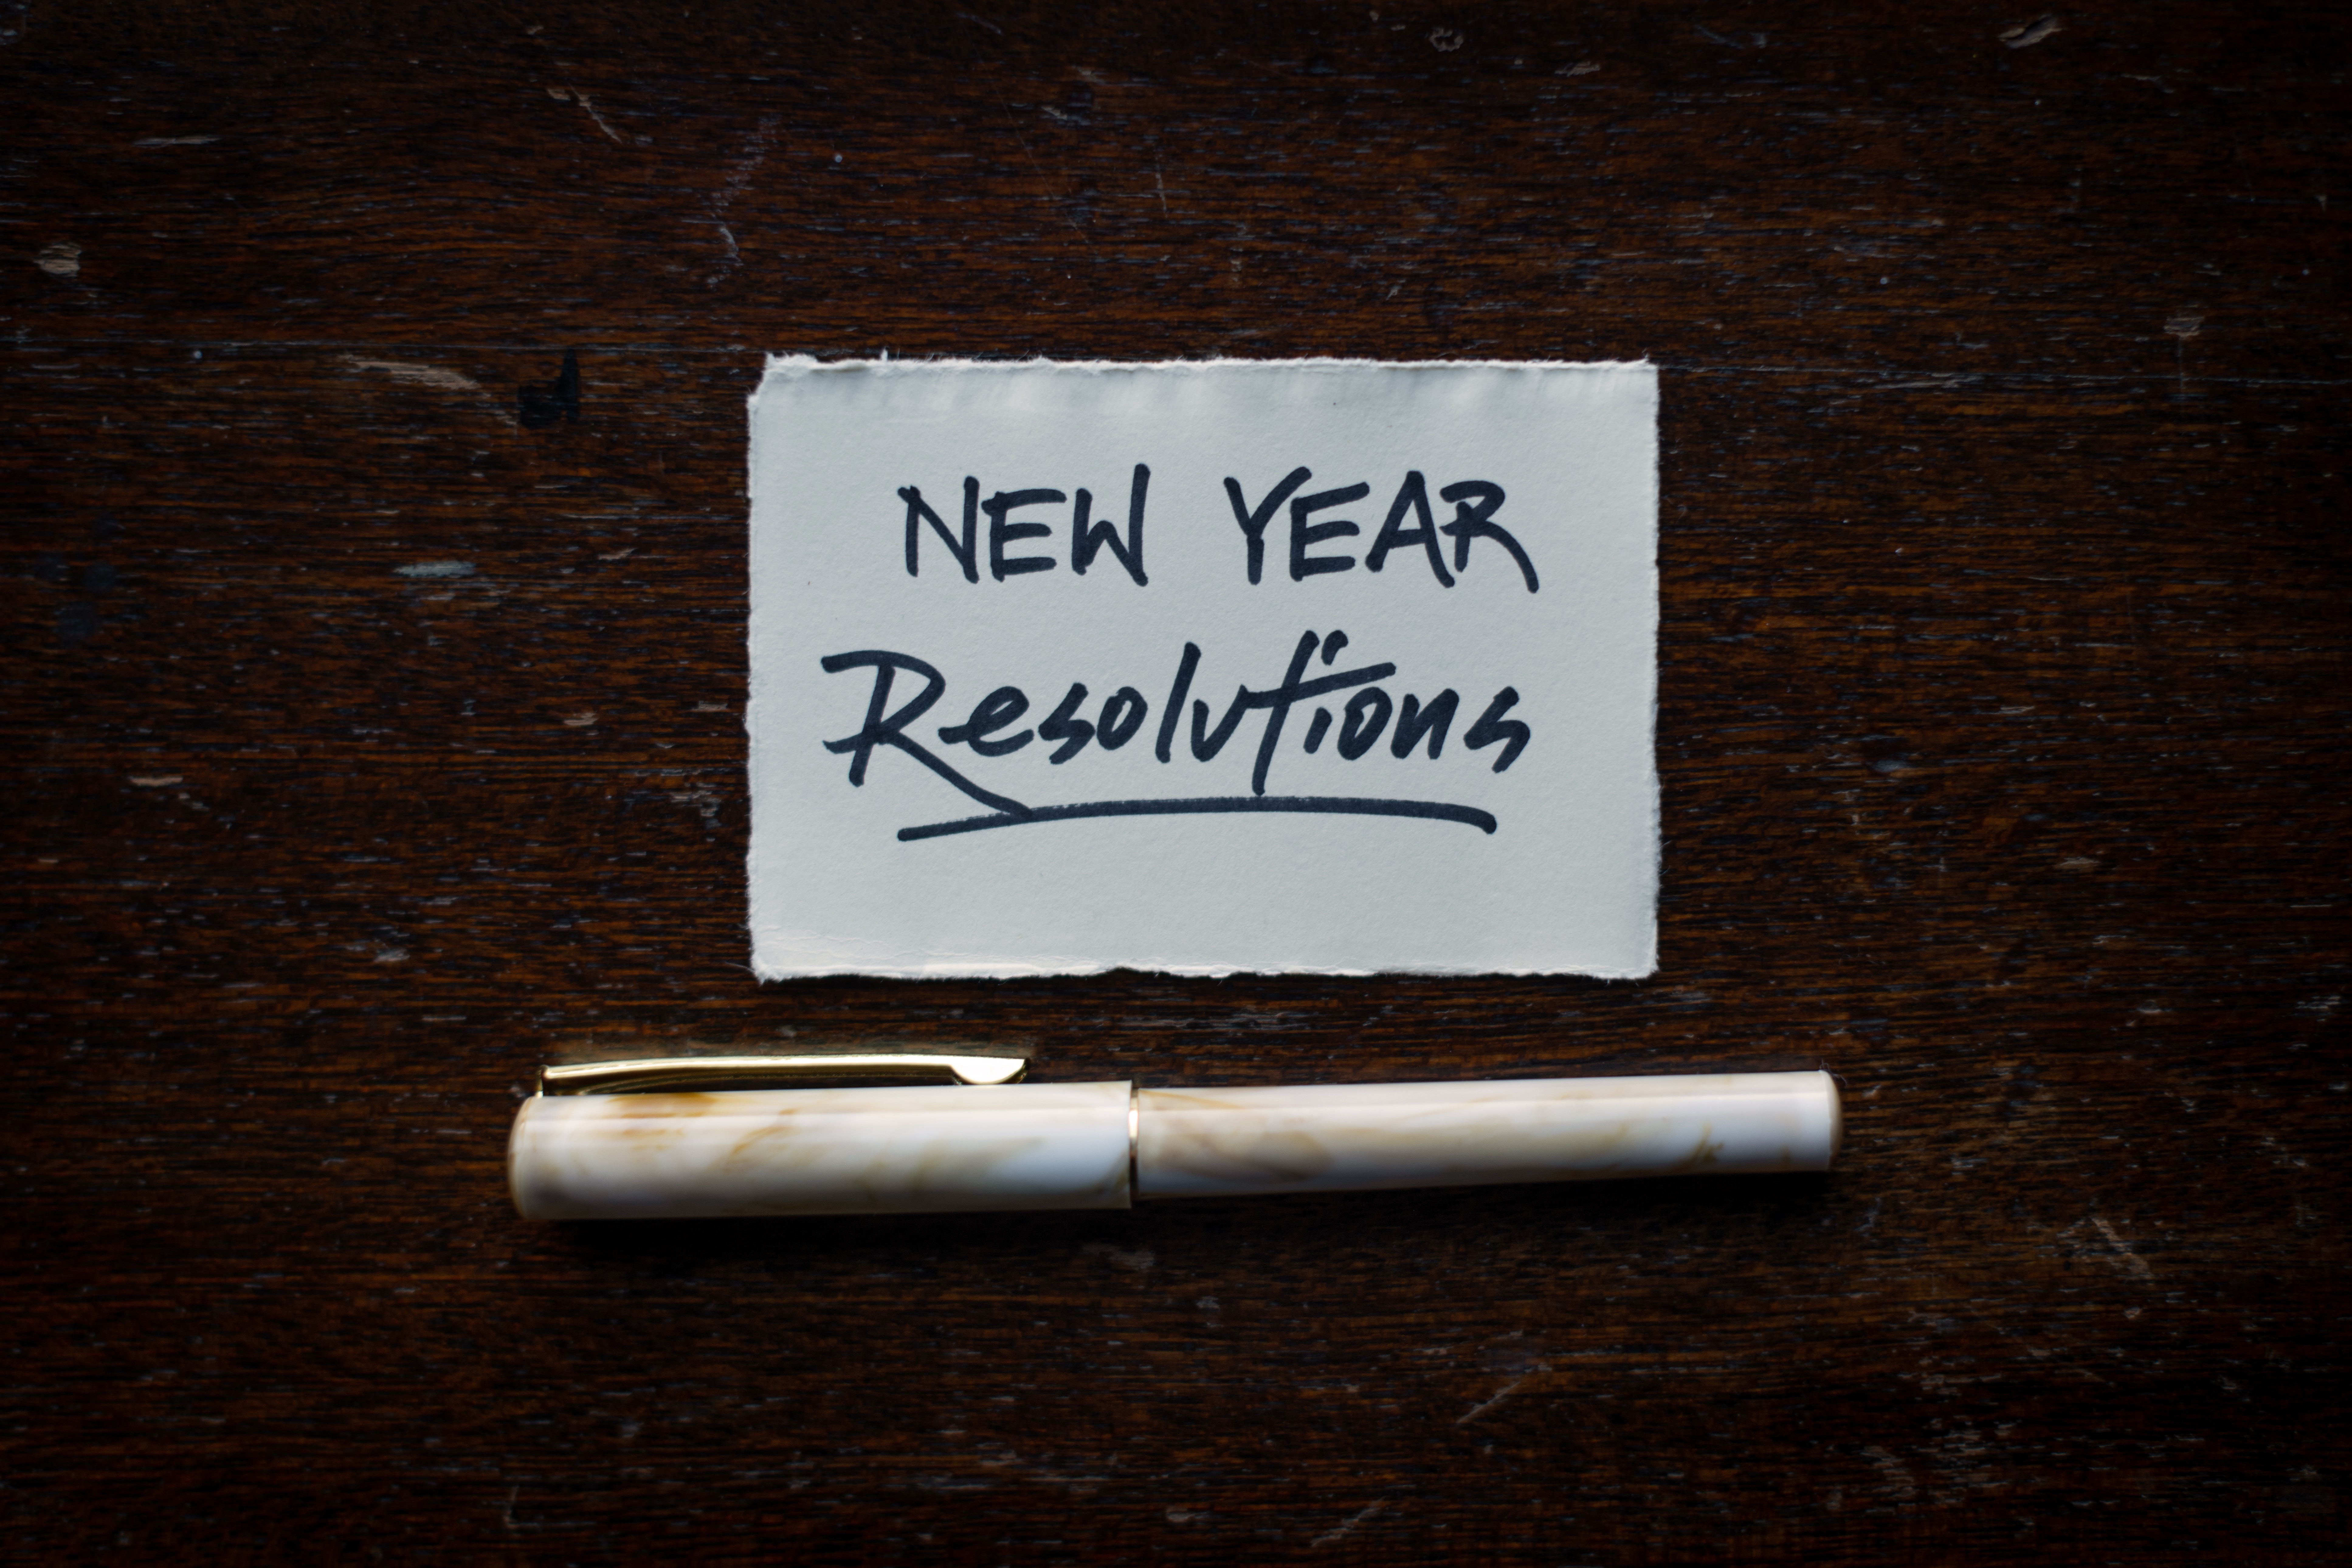 New Year Resolution written on a paper with a pen below it.